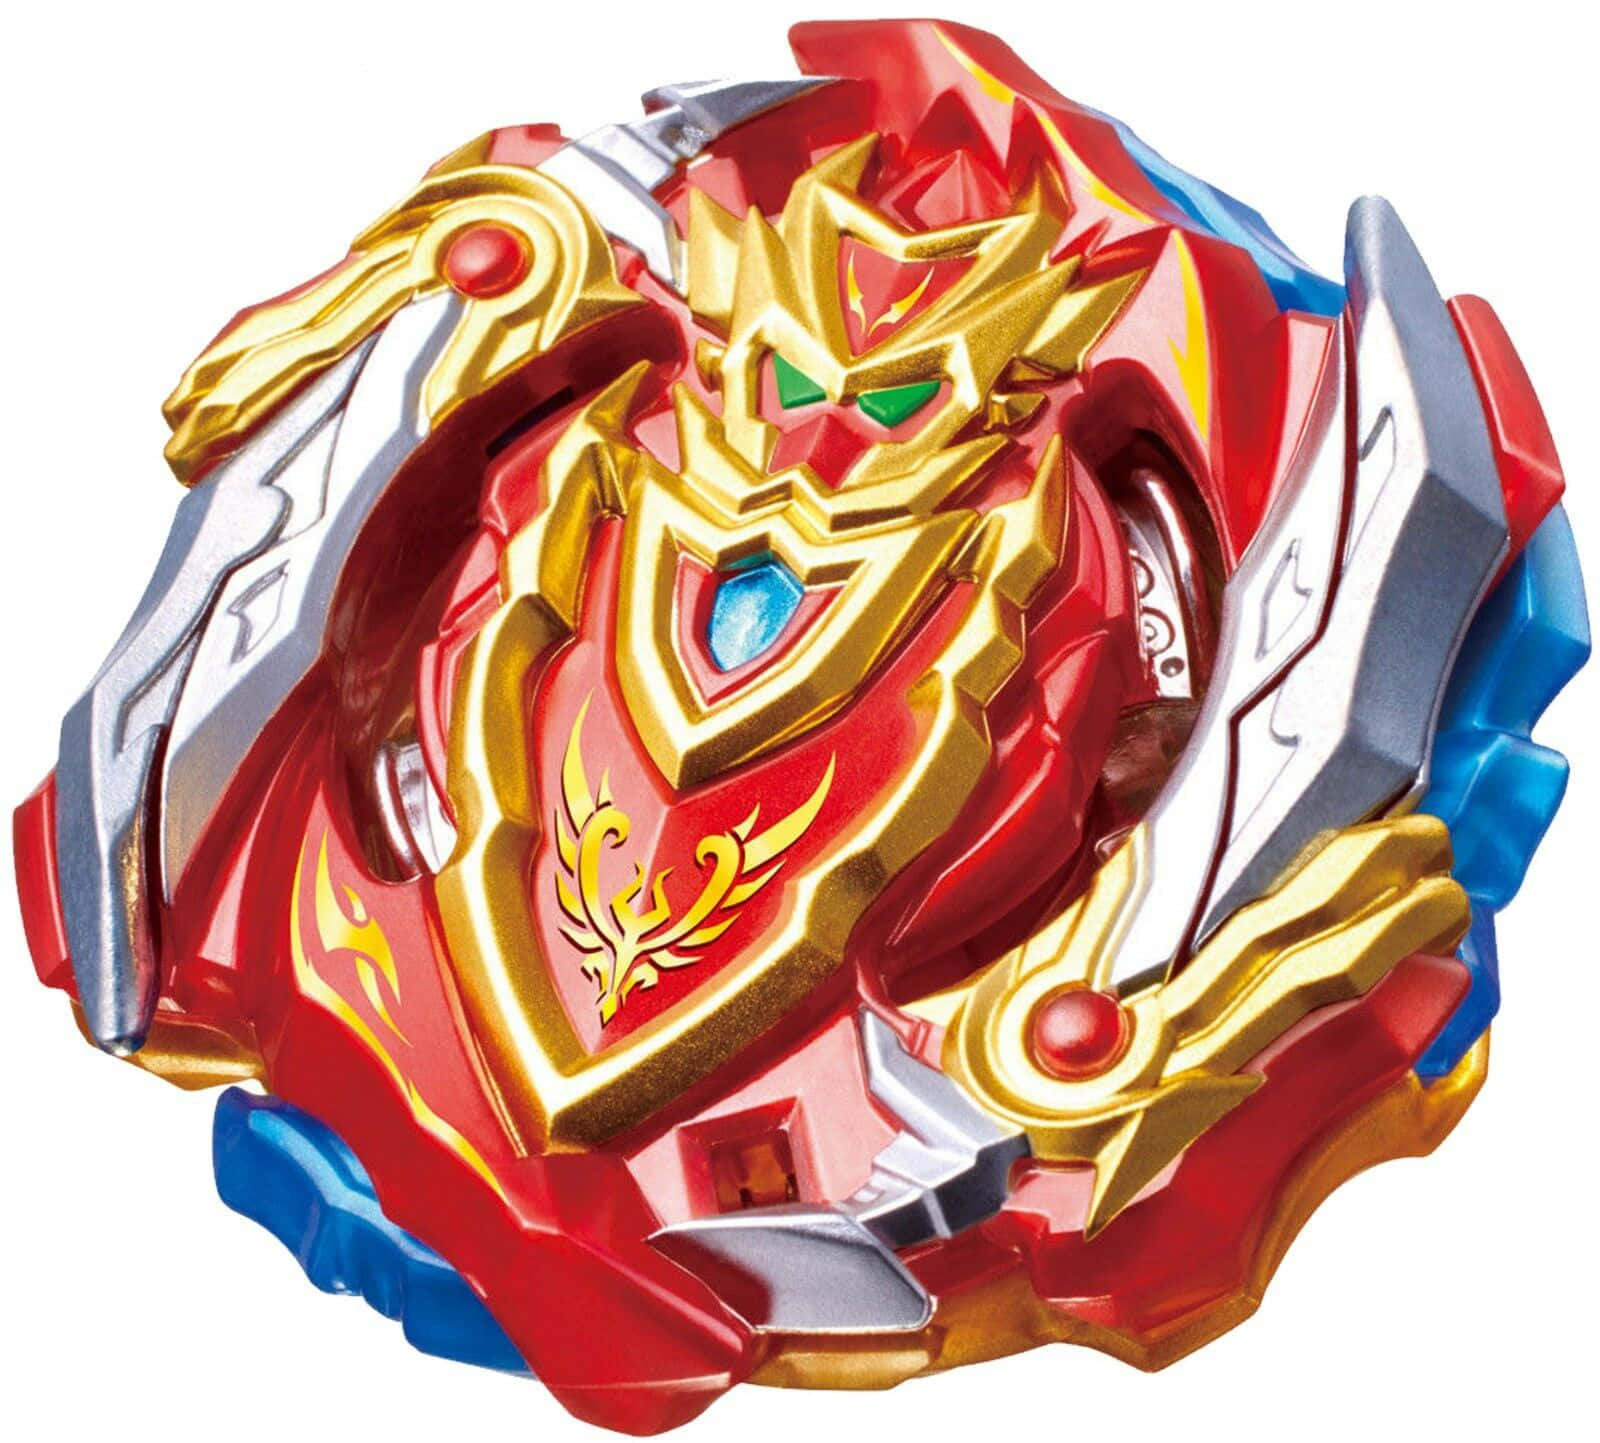 Test your spinning skills with Beyblade Burst